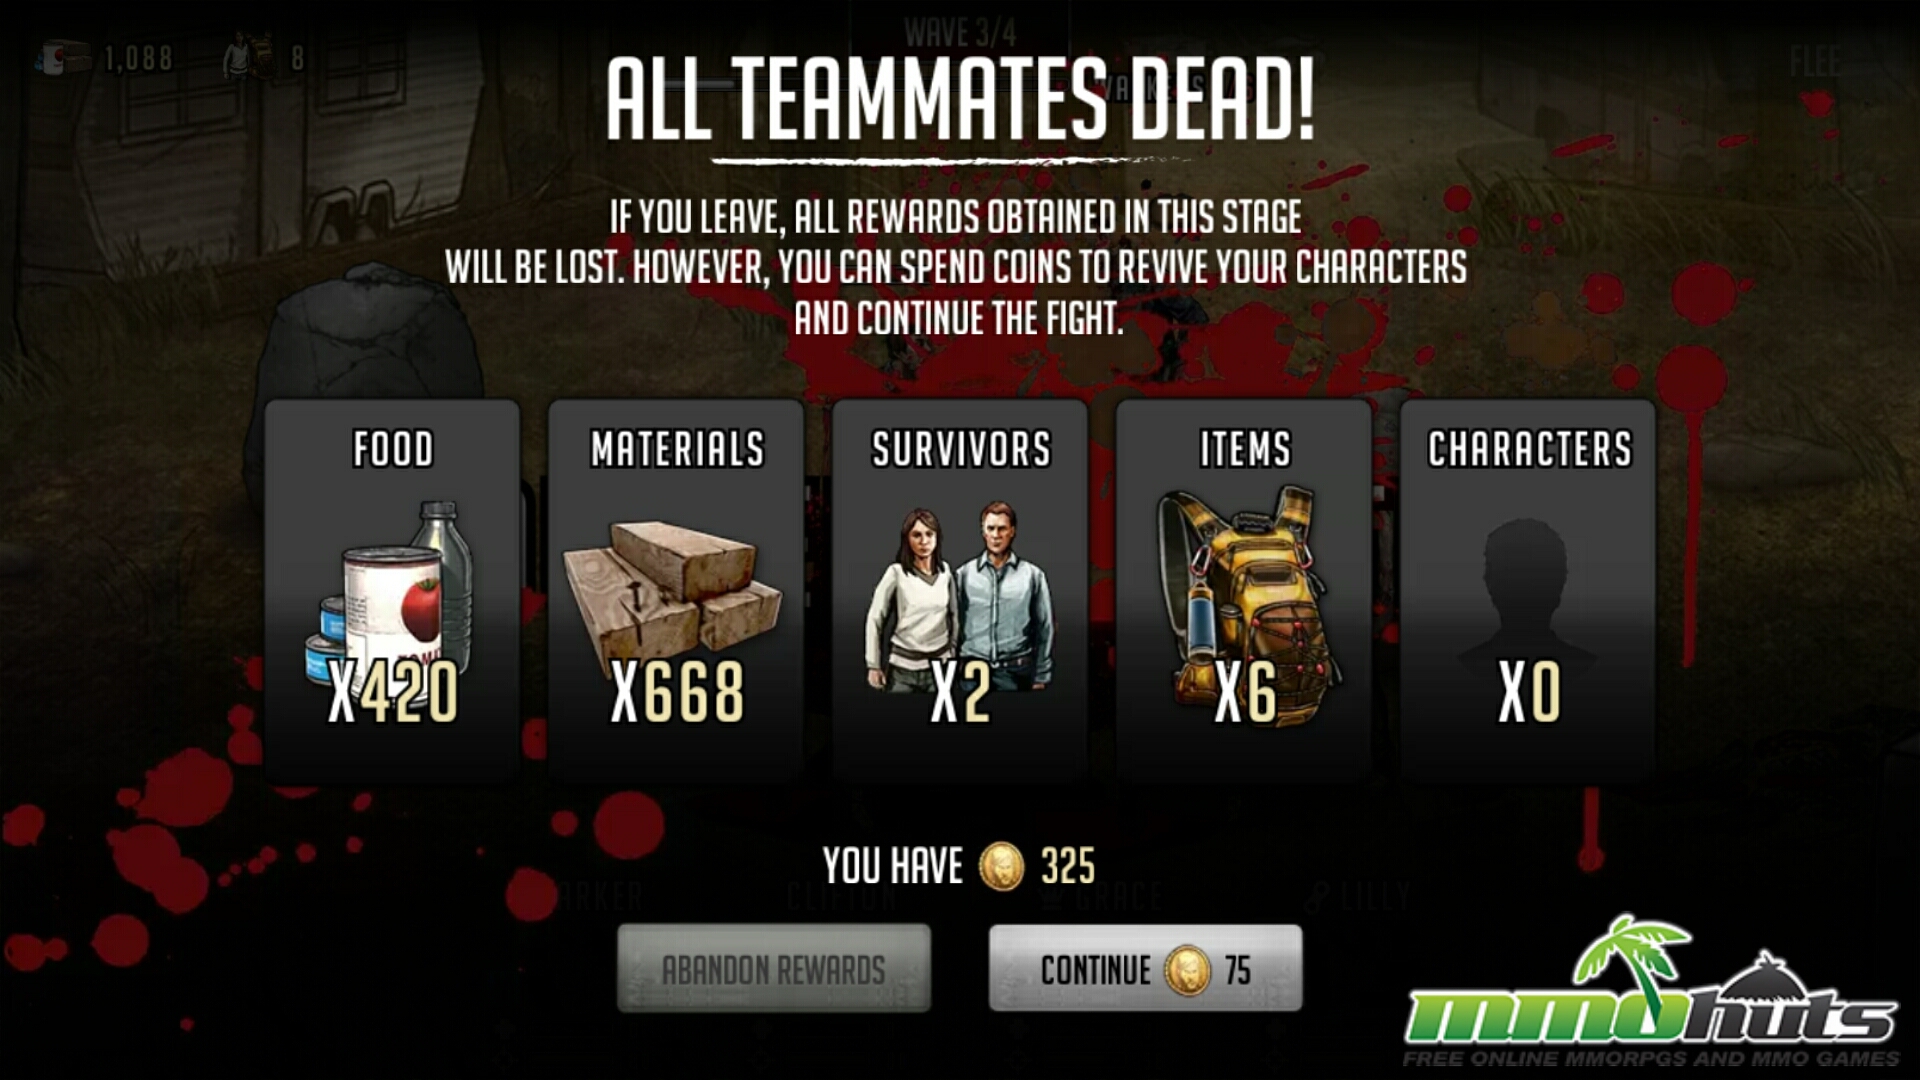 the walking dead road to survival account for sale download free